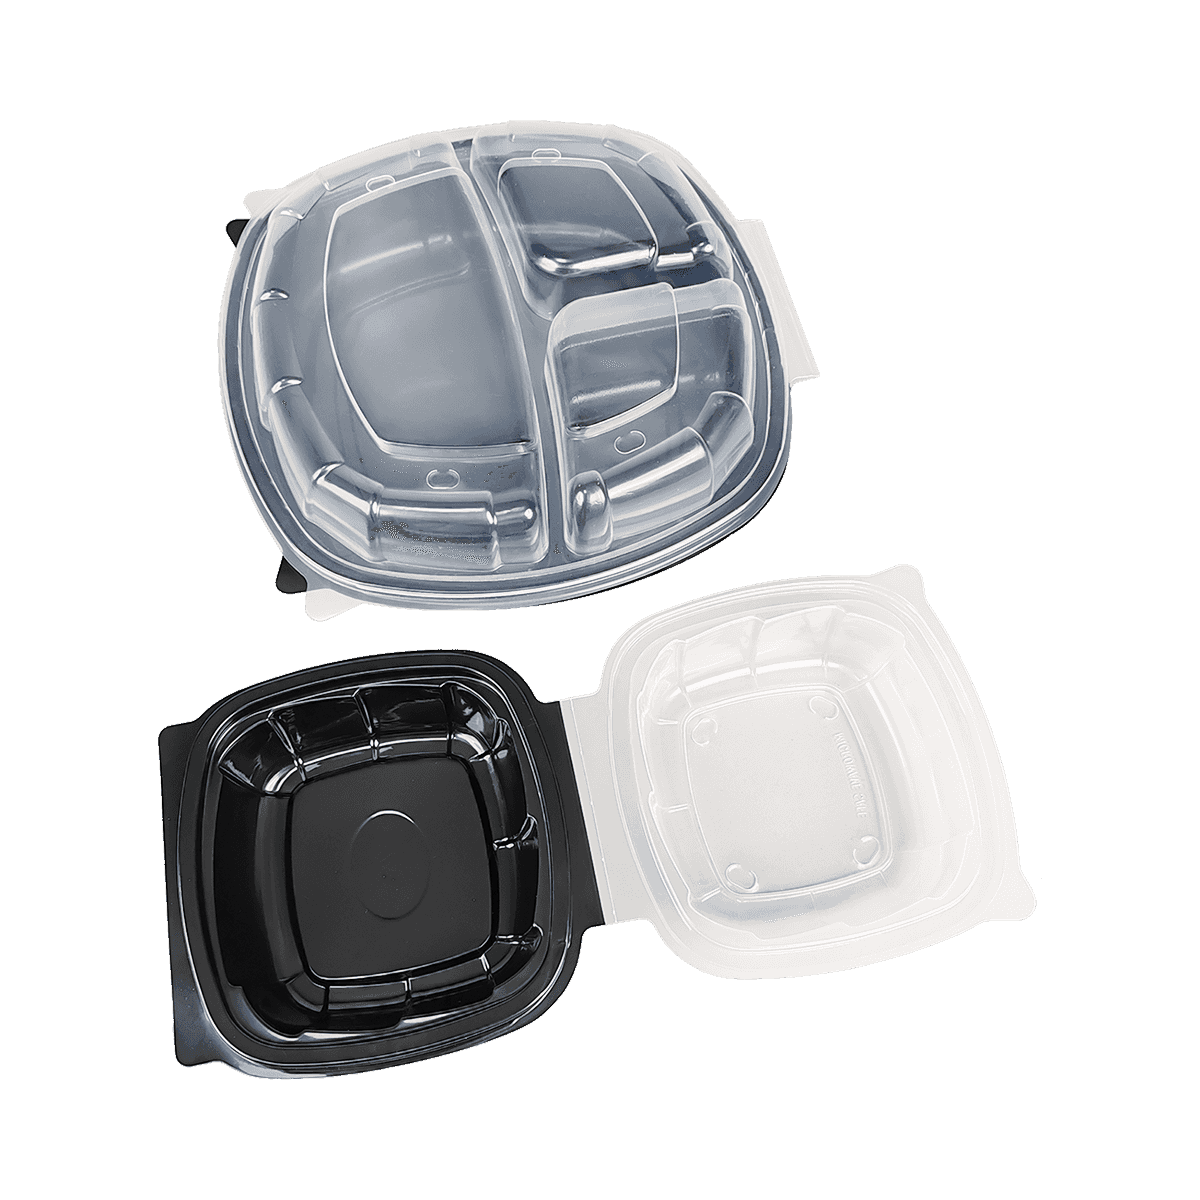 ZK-PP-036 Freezer And Microwave Safe PP Packaging Containers Reusable For Kitchen Storage, Meal Prep, Takeaway, Restaurant Supplies